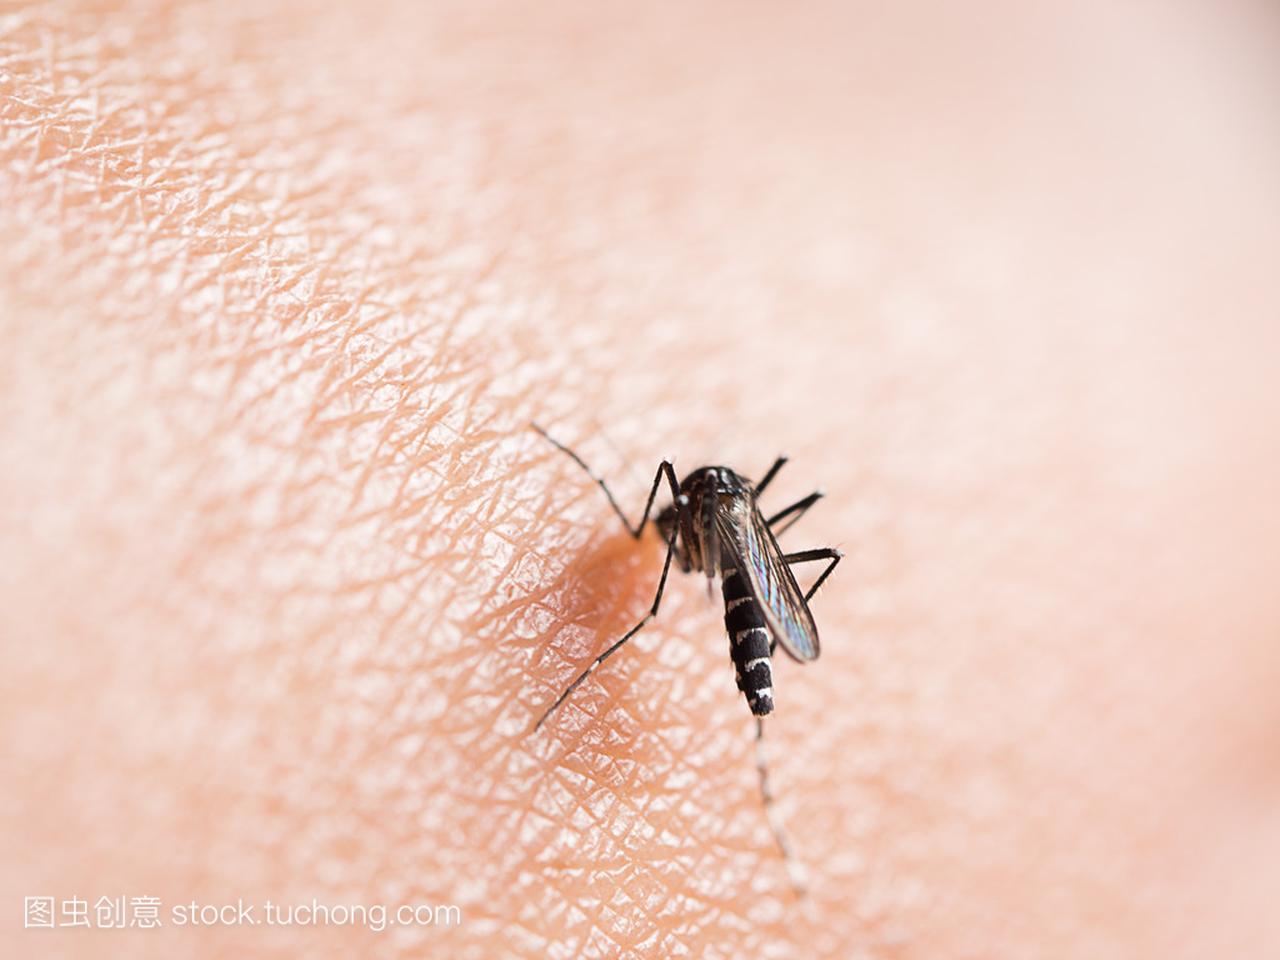 Mosquito bite on human skin (selective focus)